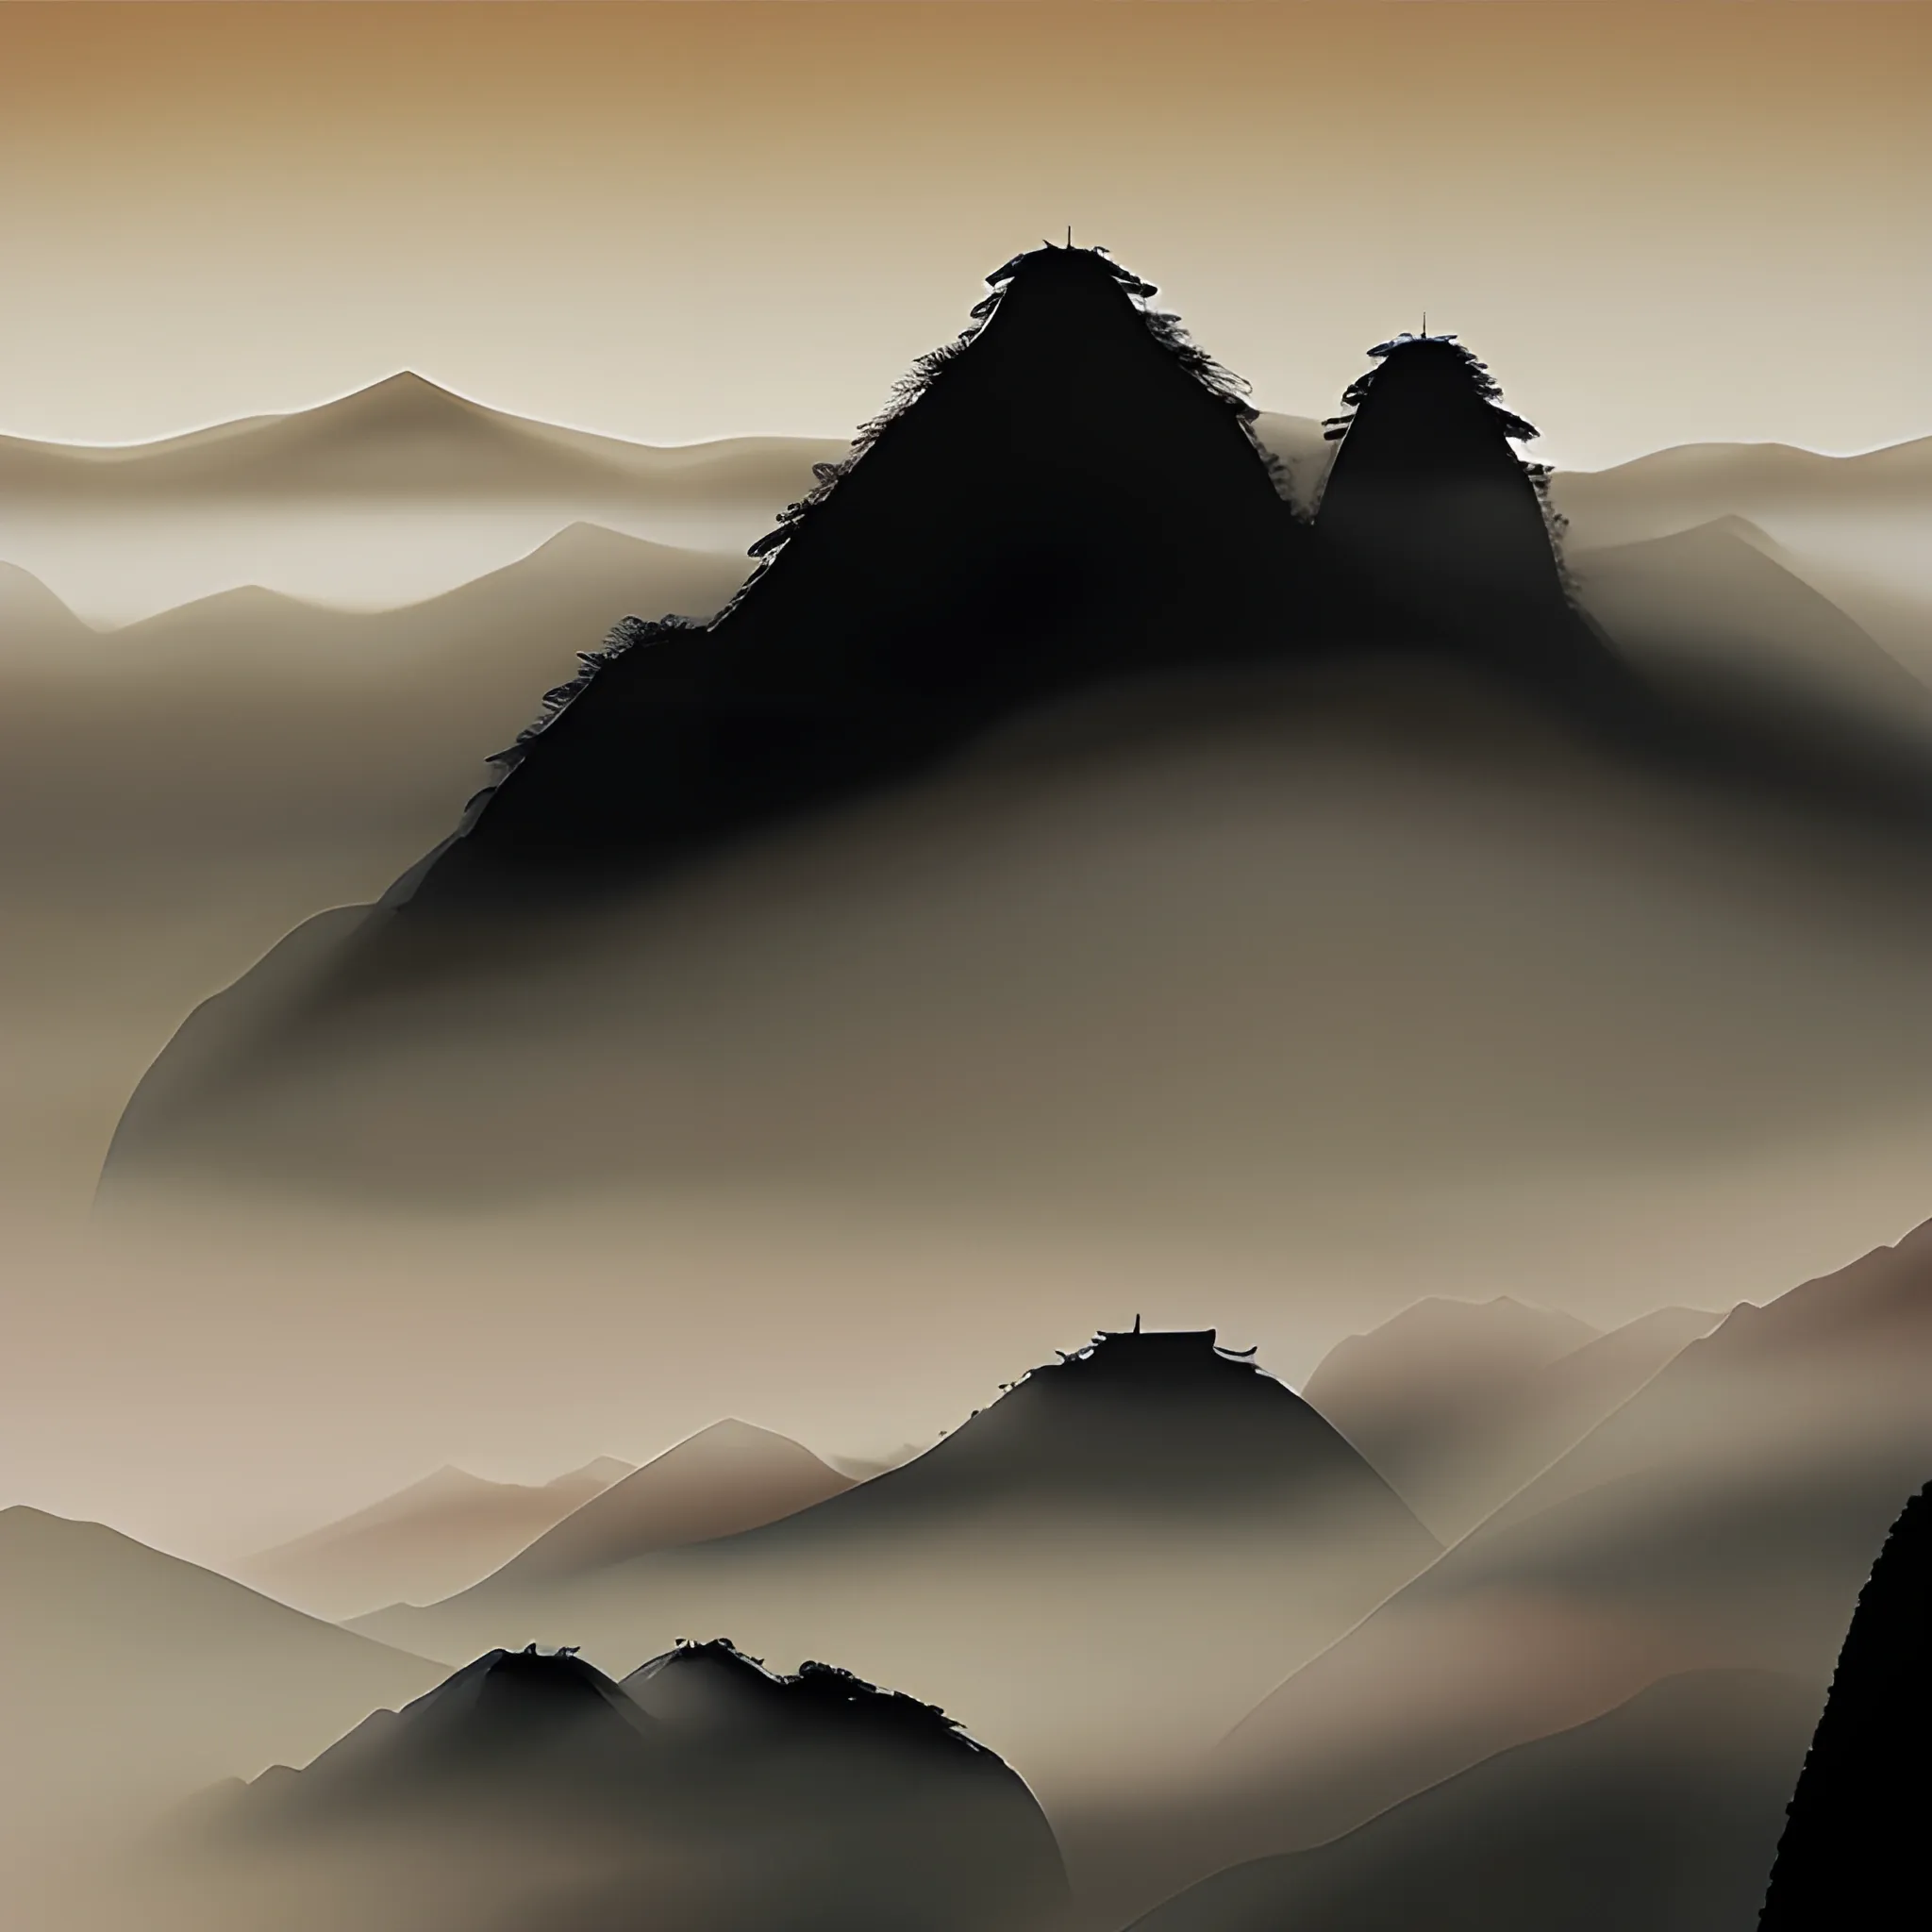 Chinese Huangshan mountain silhouette with fog, Chinese brush painting style